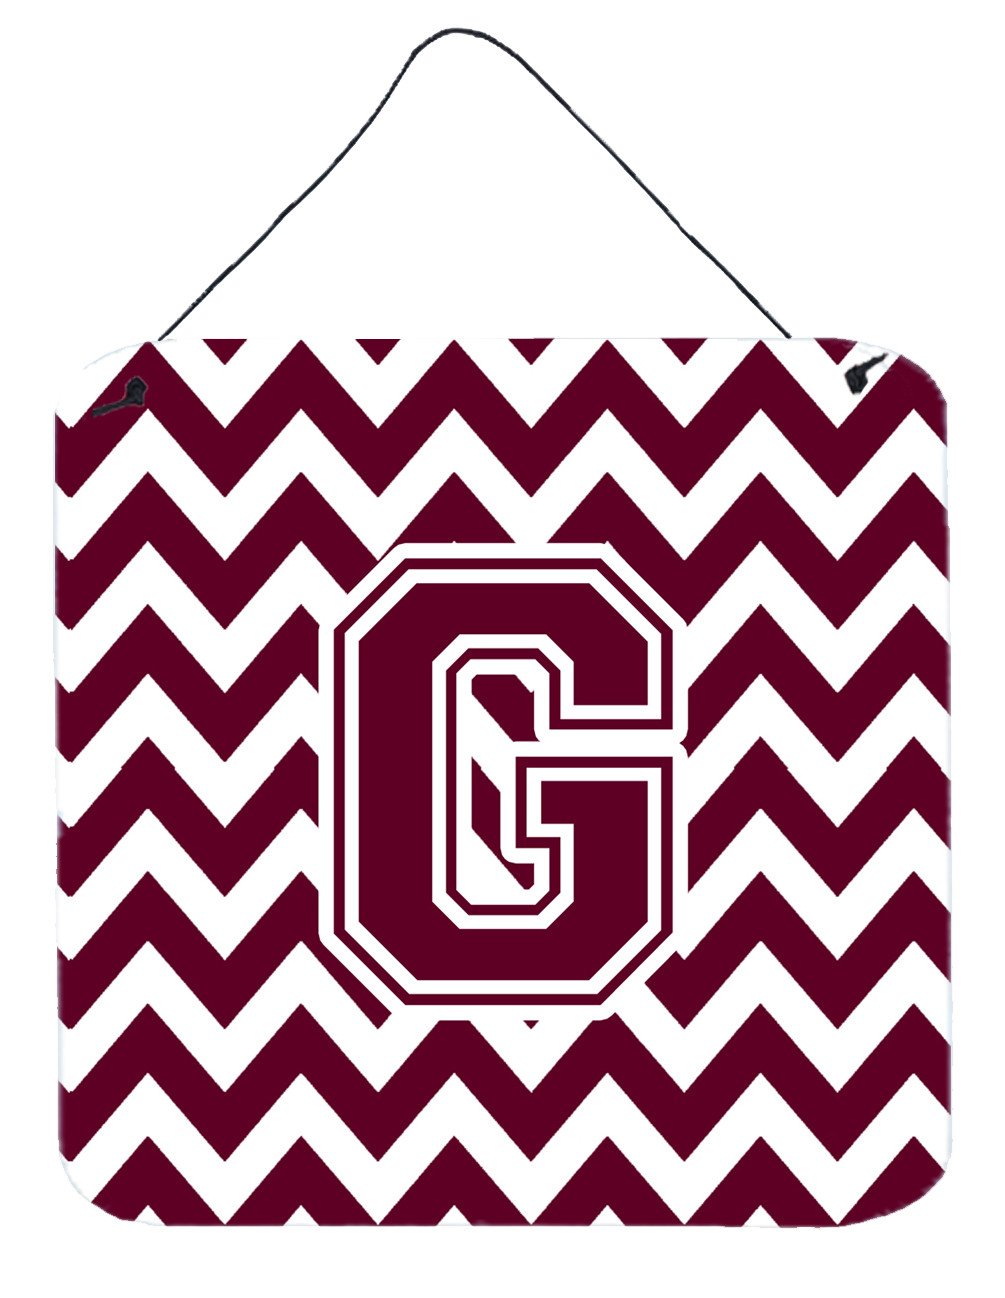 Letter G Chevron Maroon and White  Wall or Door Hanging Prints CJ1051-GDS66 by Caroline's Treasures